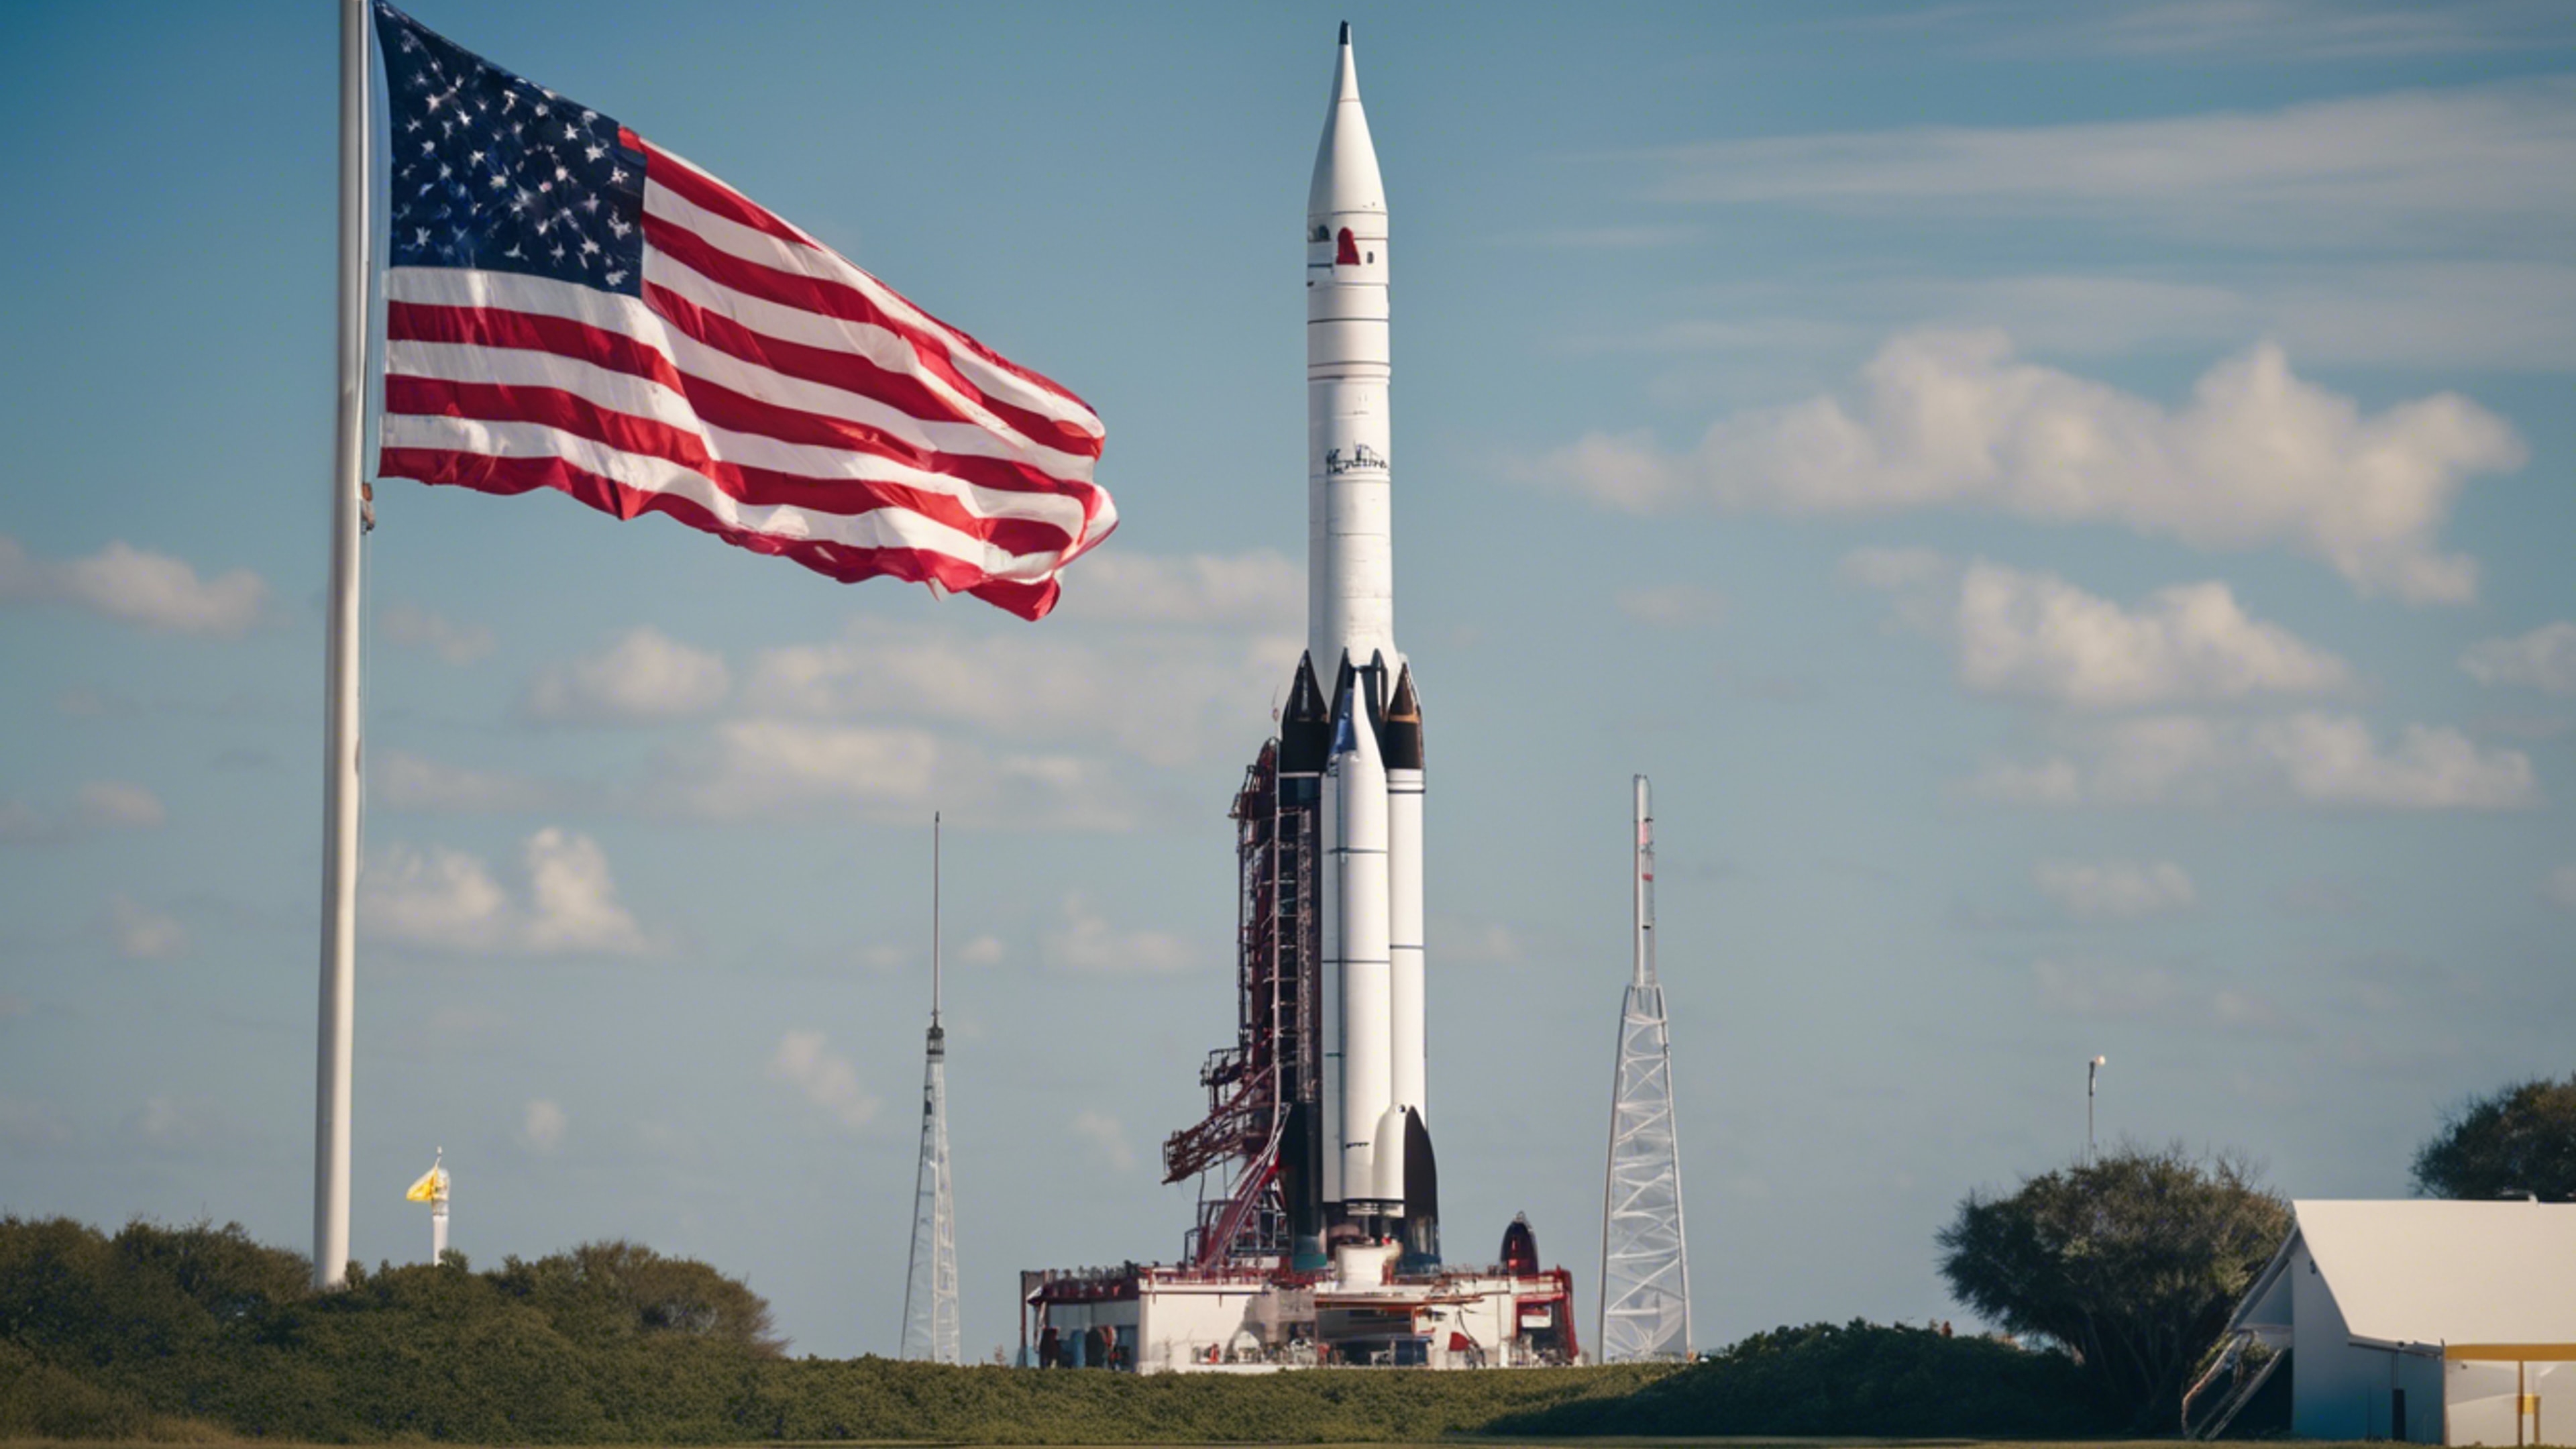 A historic rocket display at Cape Canaveral, with a clear blue sky and the American flag waving in the background. Ფონი[7e3199d5ab33424fb953]